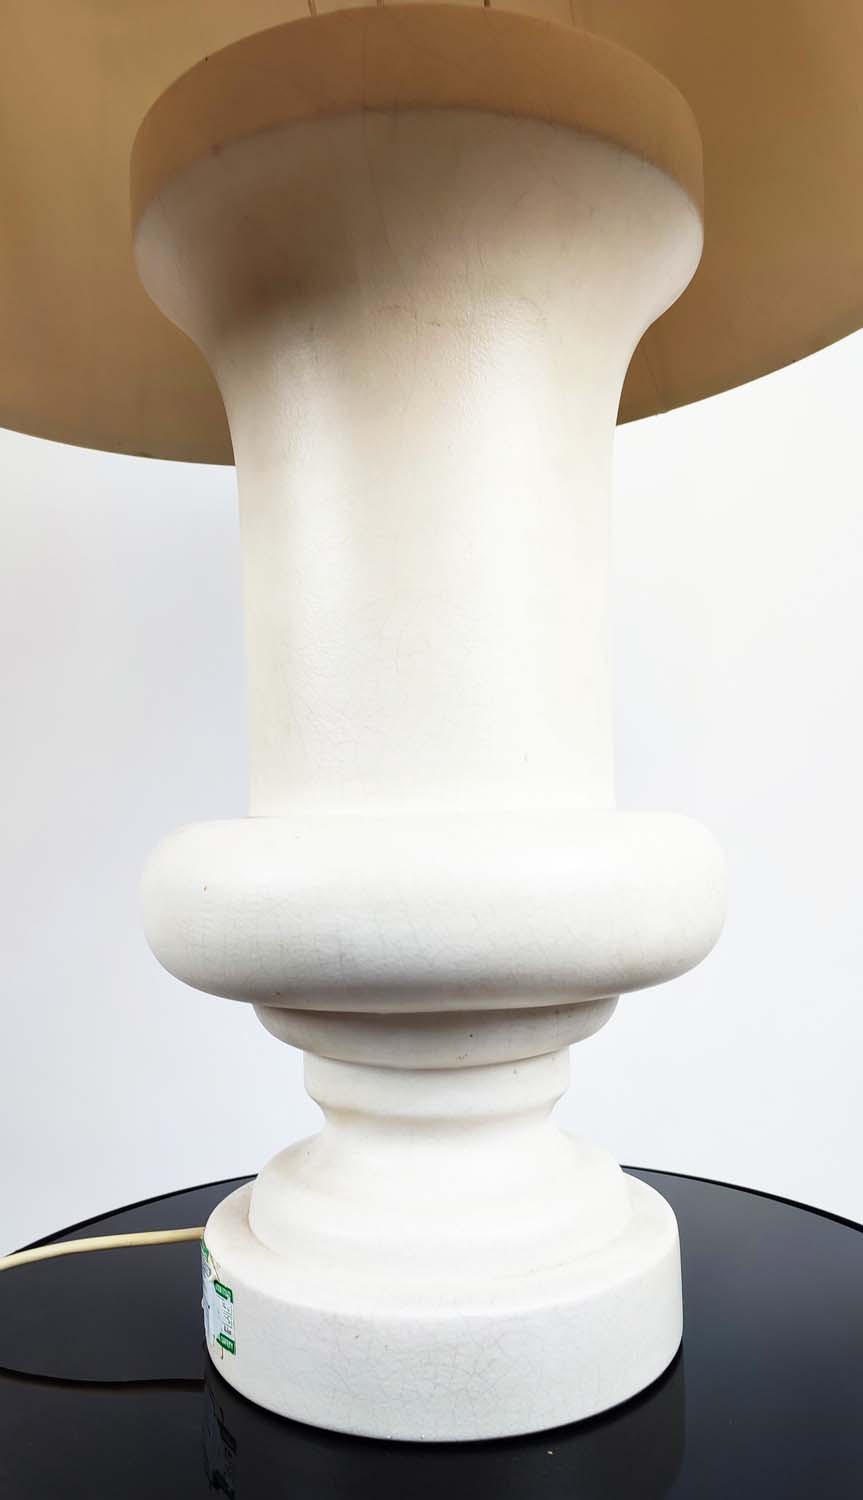 TABLE LAMP, white ceramic, with shade, 92cm high, 55cm diameter. - Image 3 of 6